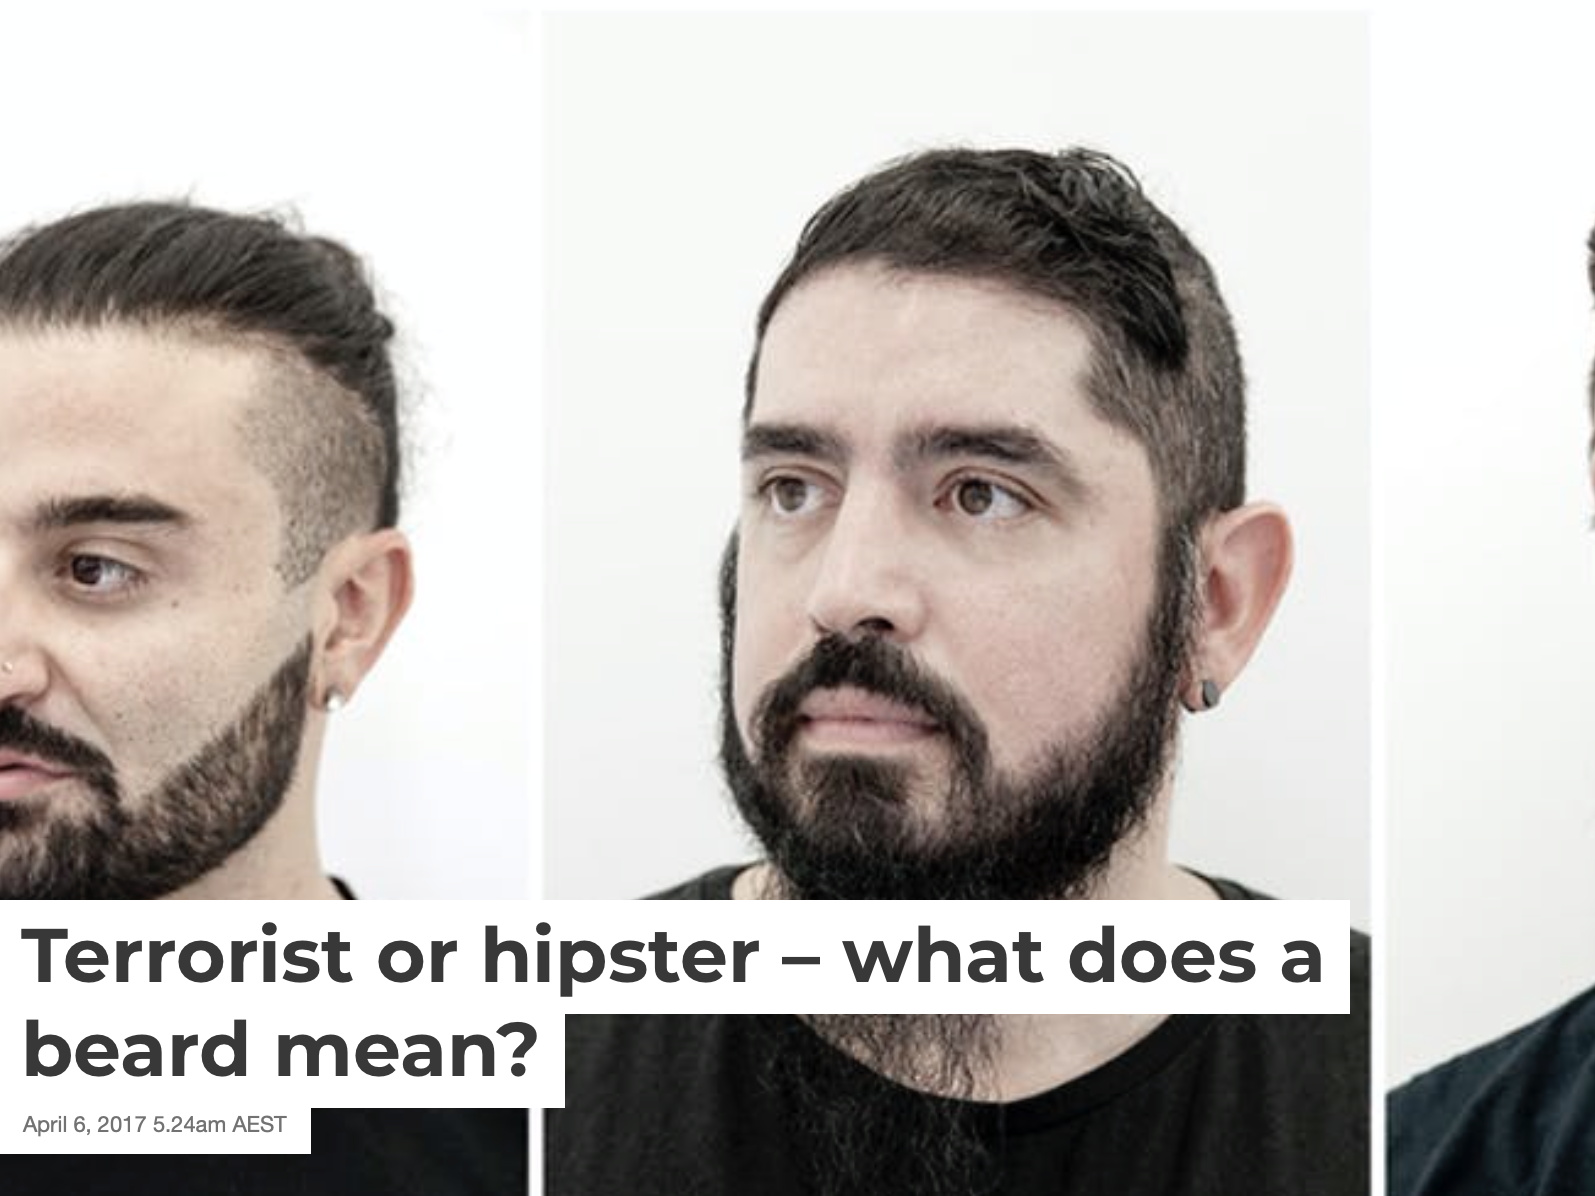 Terrorist or hipster, what does a beard mean